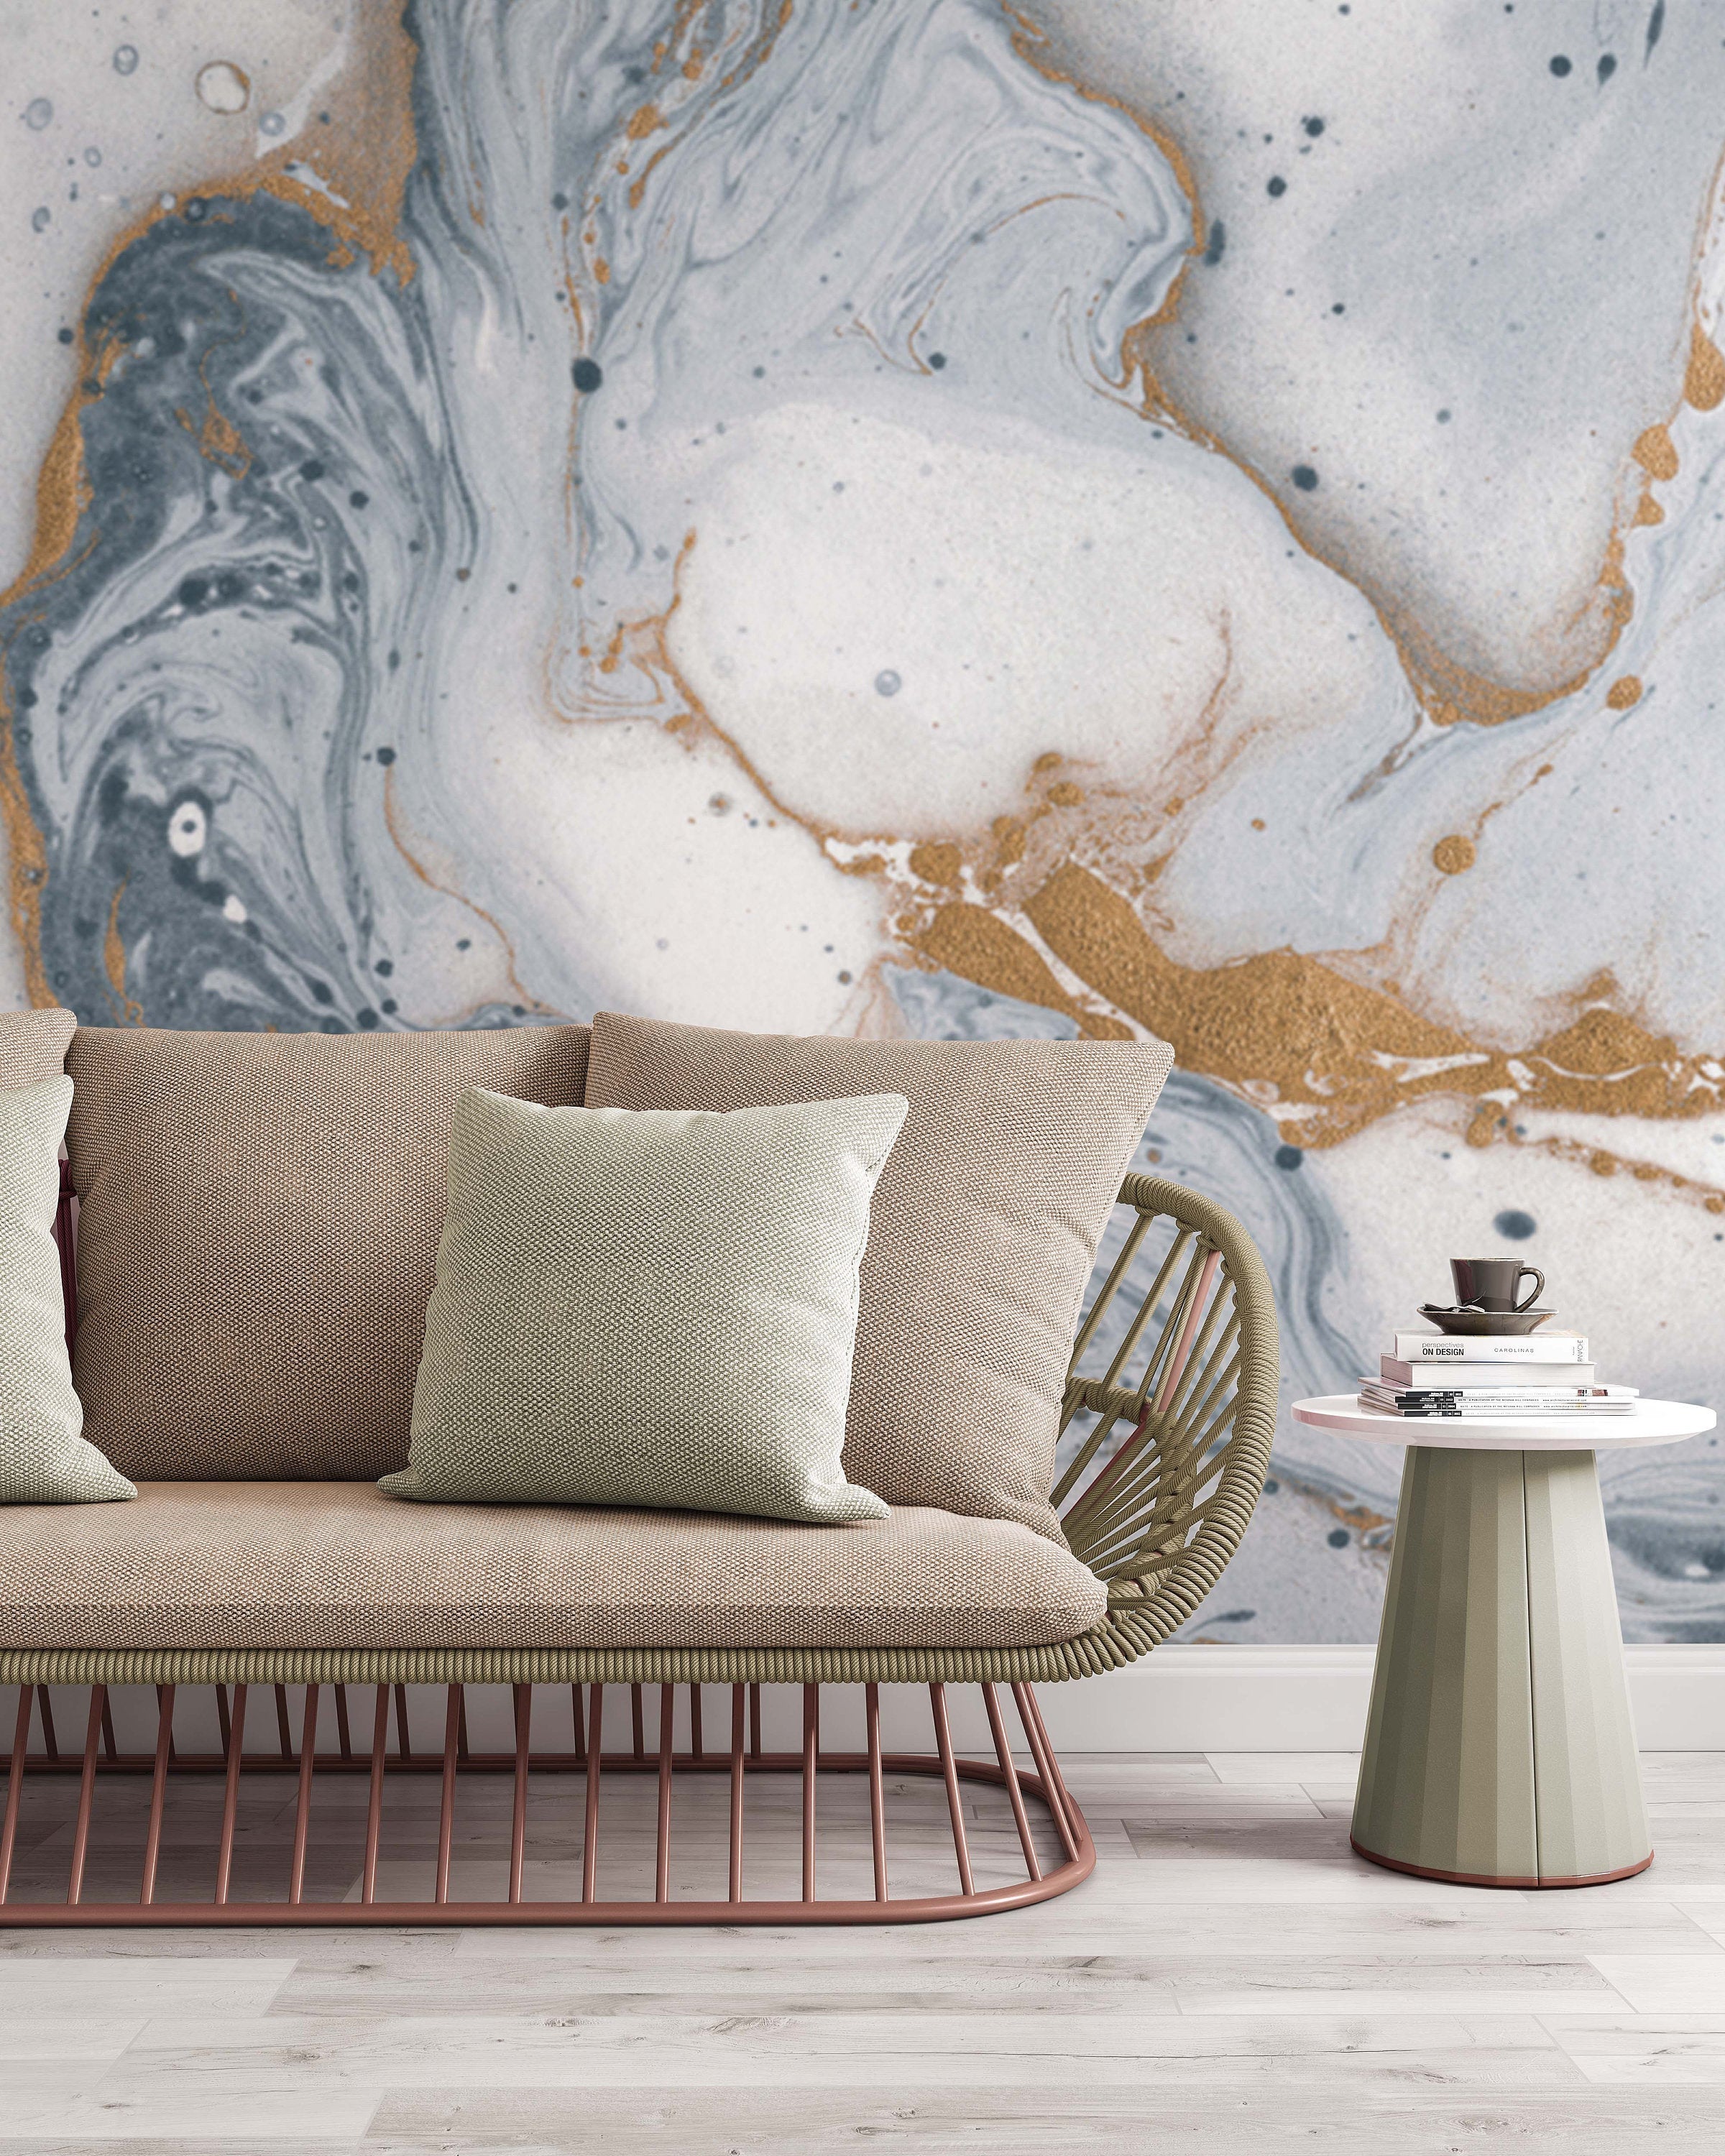 Gray and Golden Paints Abstract Marble Texture Wallpaper Bathroom Restaurant Bedroom Living Room Cafe Office Mural Home Decor Wall Art